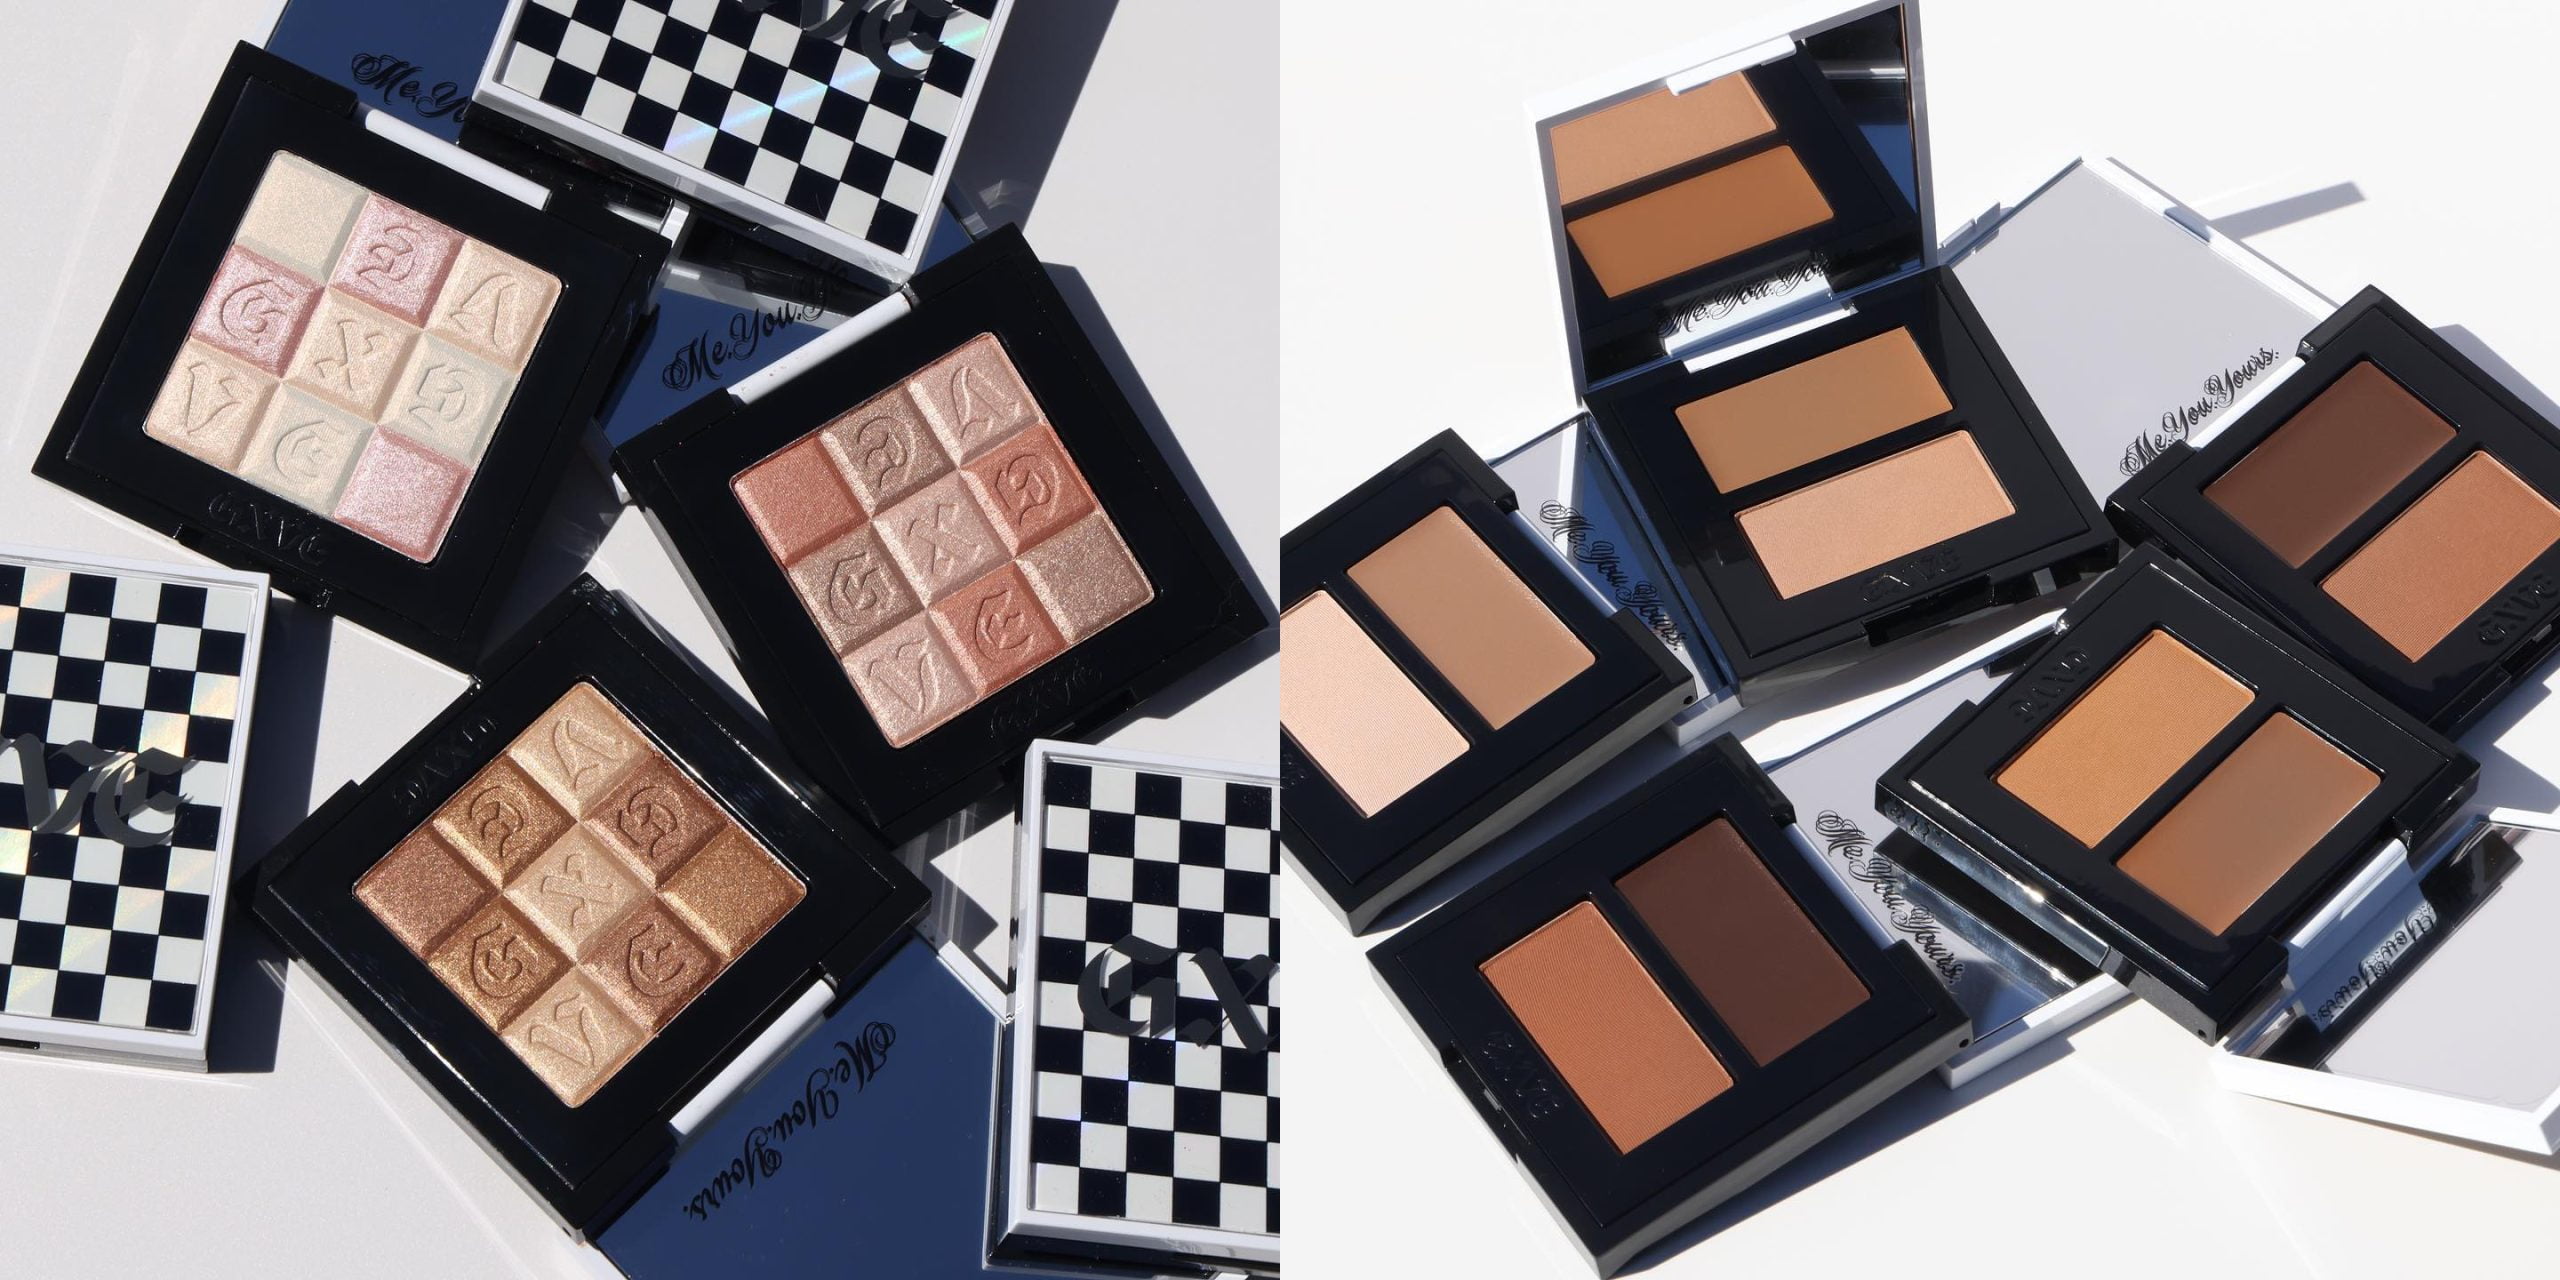 GXVE has announced new illuminating and contouring palettes